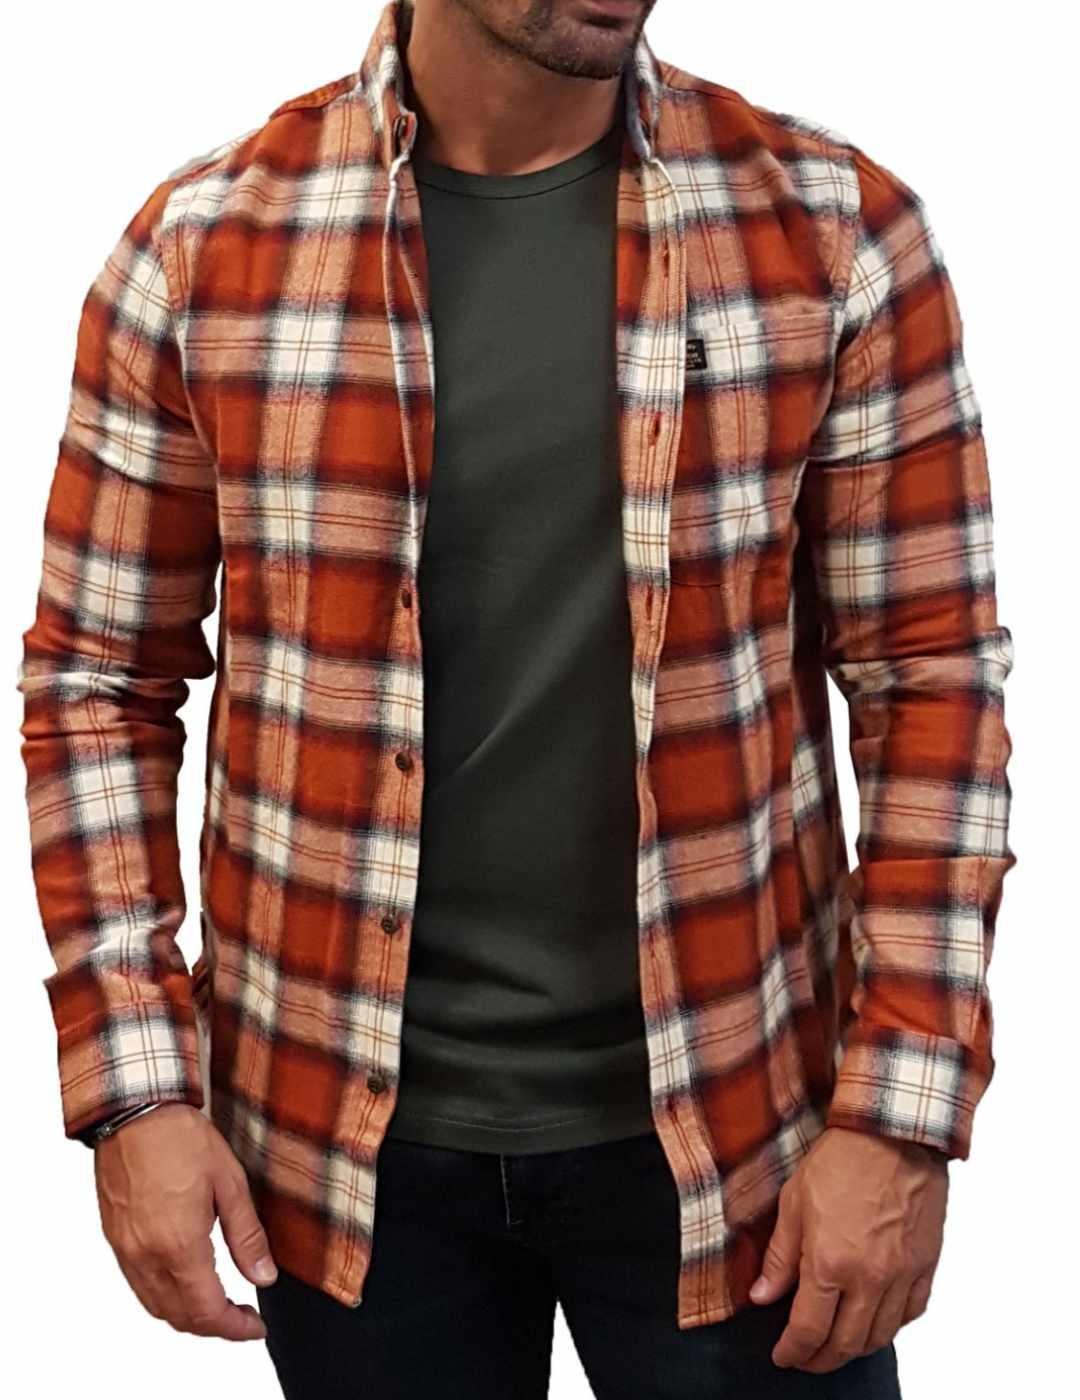 Camiseta Hombre Superdry Vintage Into The Woods – BROTH3RS